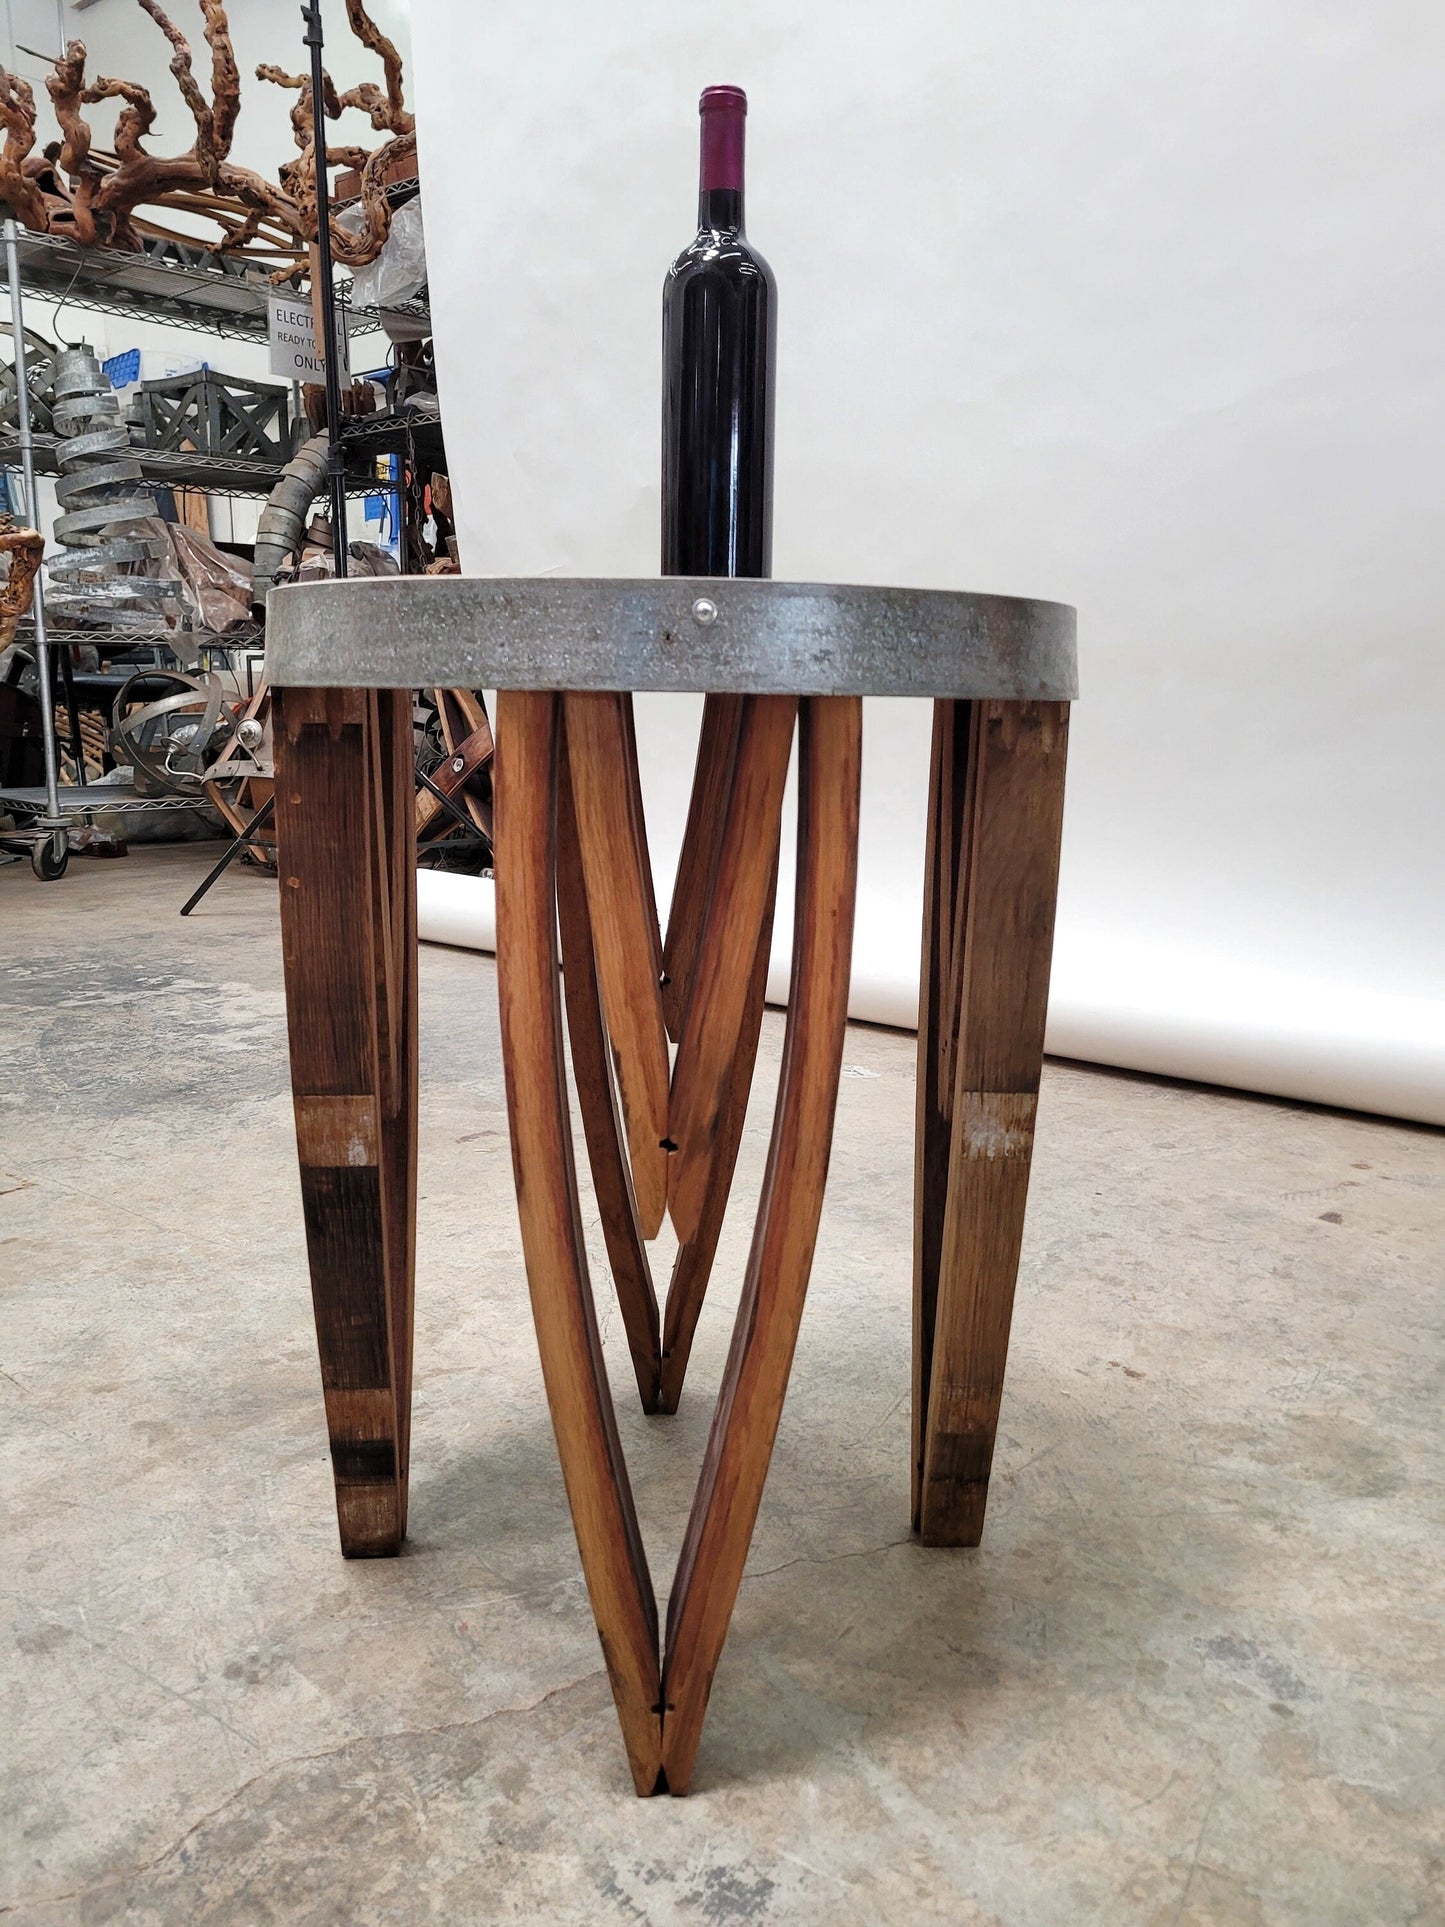 Wine Barrel Side Table - Kapea - made from retired Napa wine barrels. 100% Recycled!